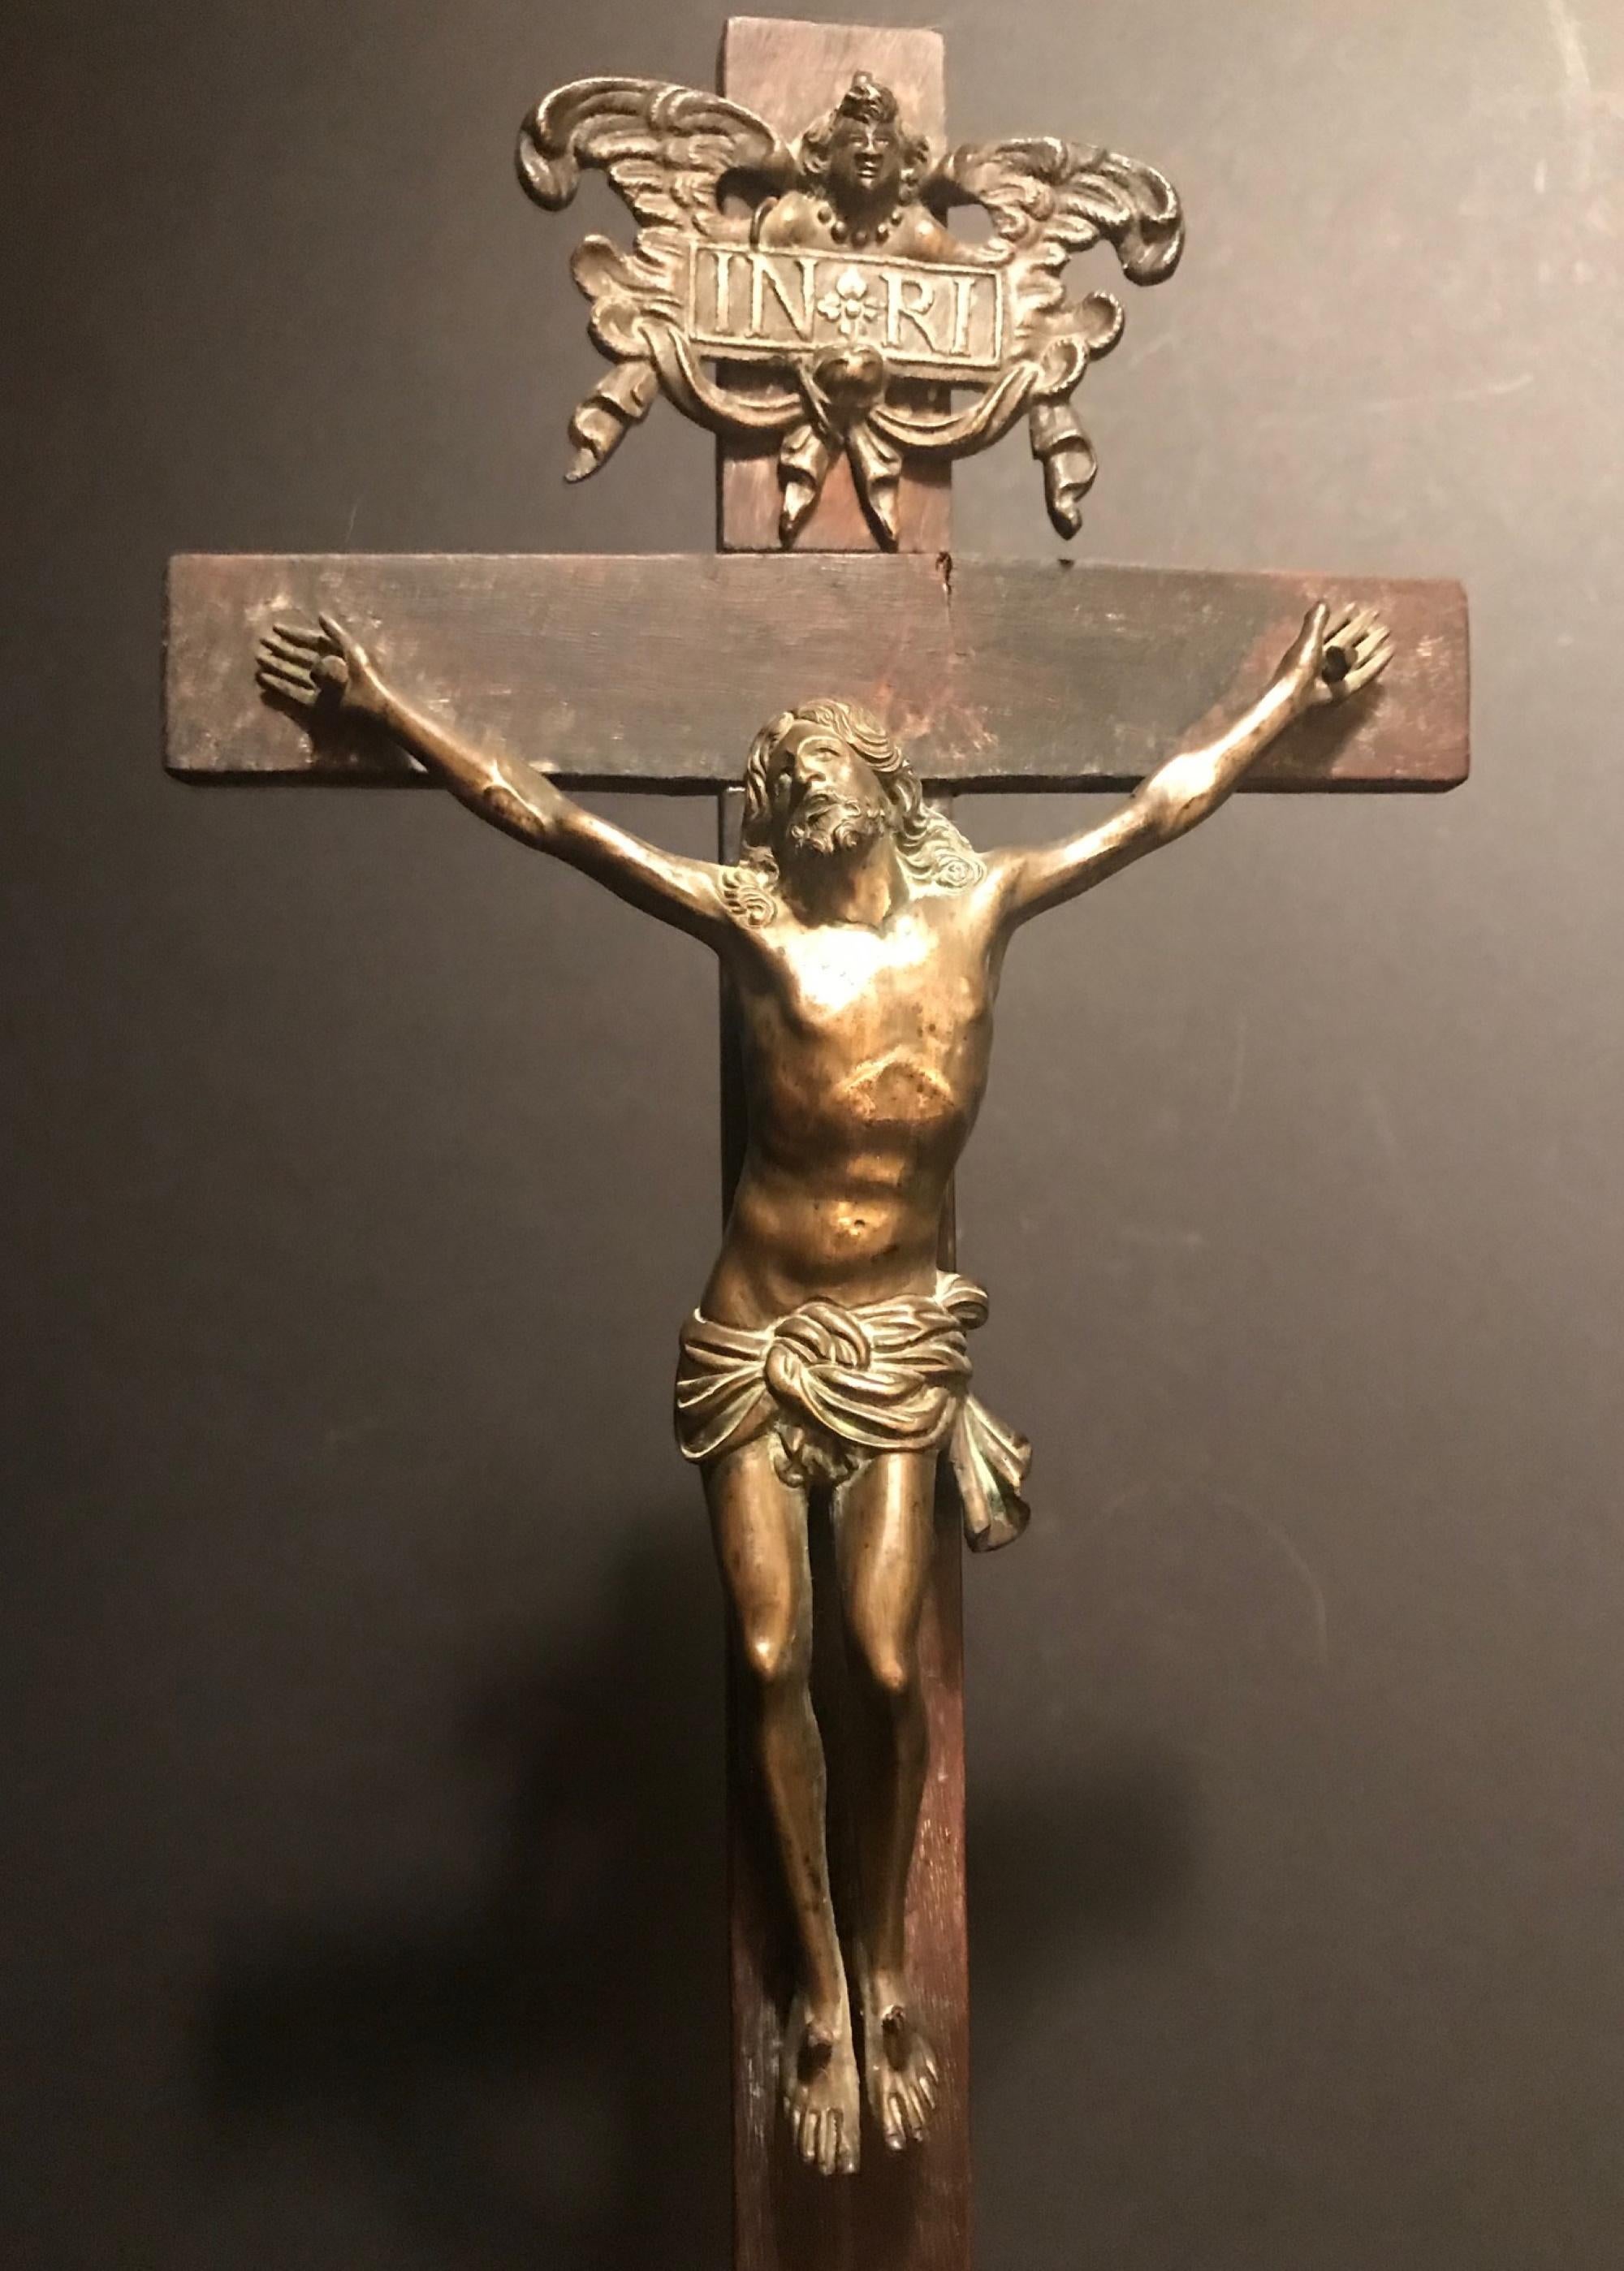 Important Italian 17th century bronze crucifix after Giambologna, Florence, 1529-1608

Cristo vivo (The living Christ on the cross)
Christ is depicted with the head turned upwards and directs his gaze toward heaven. This head positioning is a